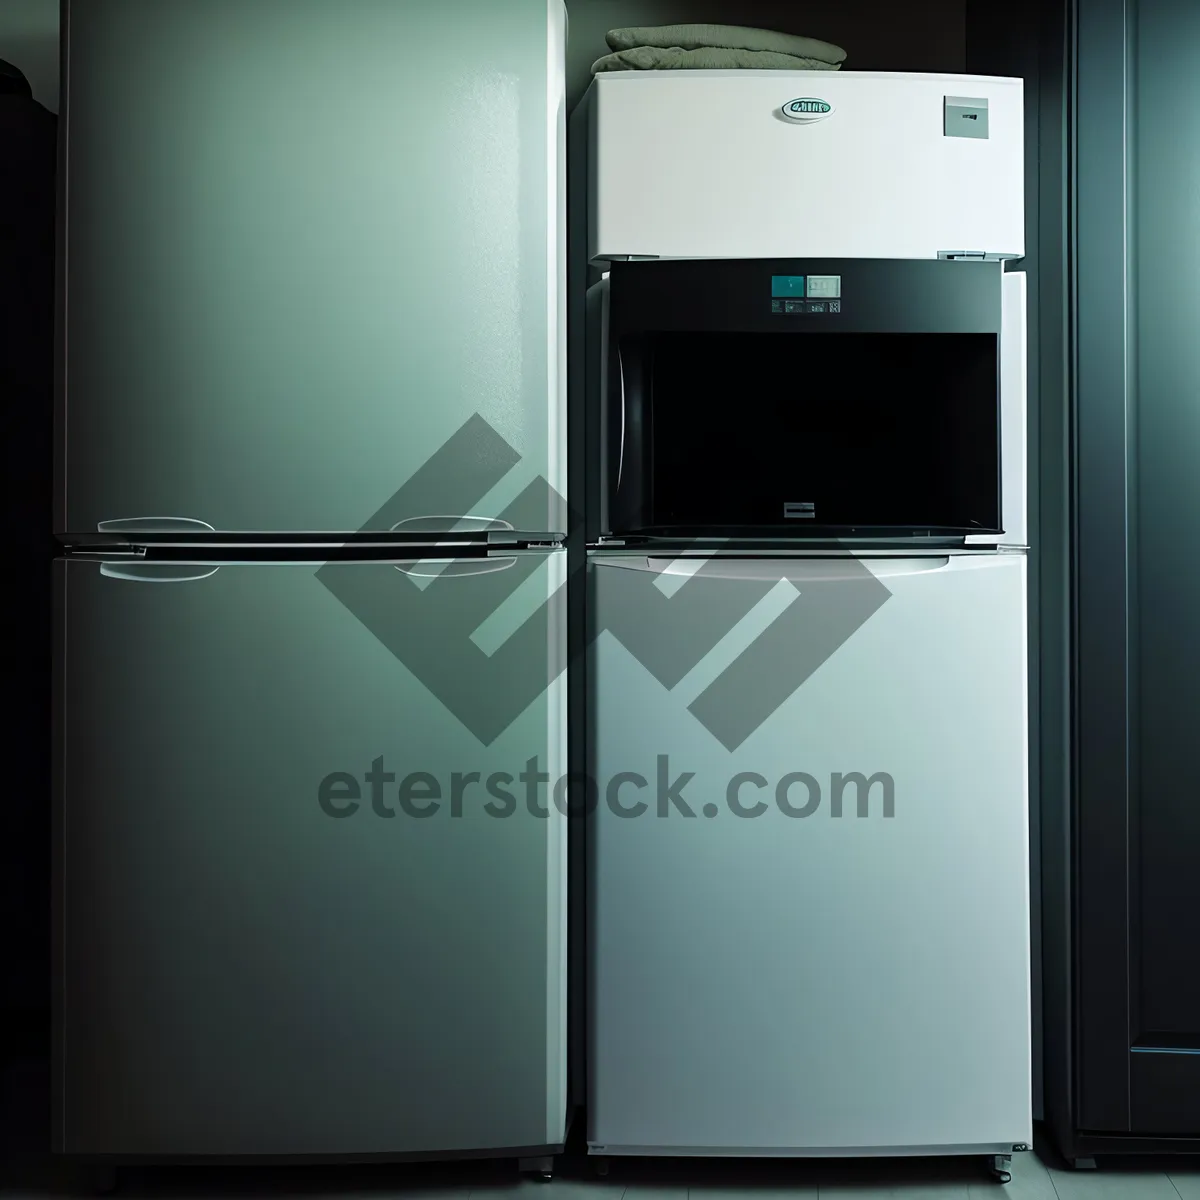 Picture of Modern White Goods Refrigerator with 3D Design